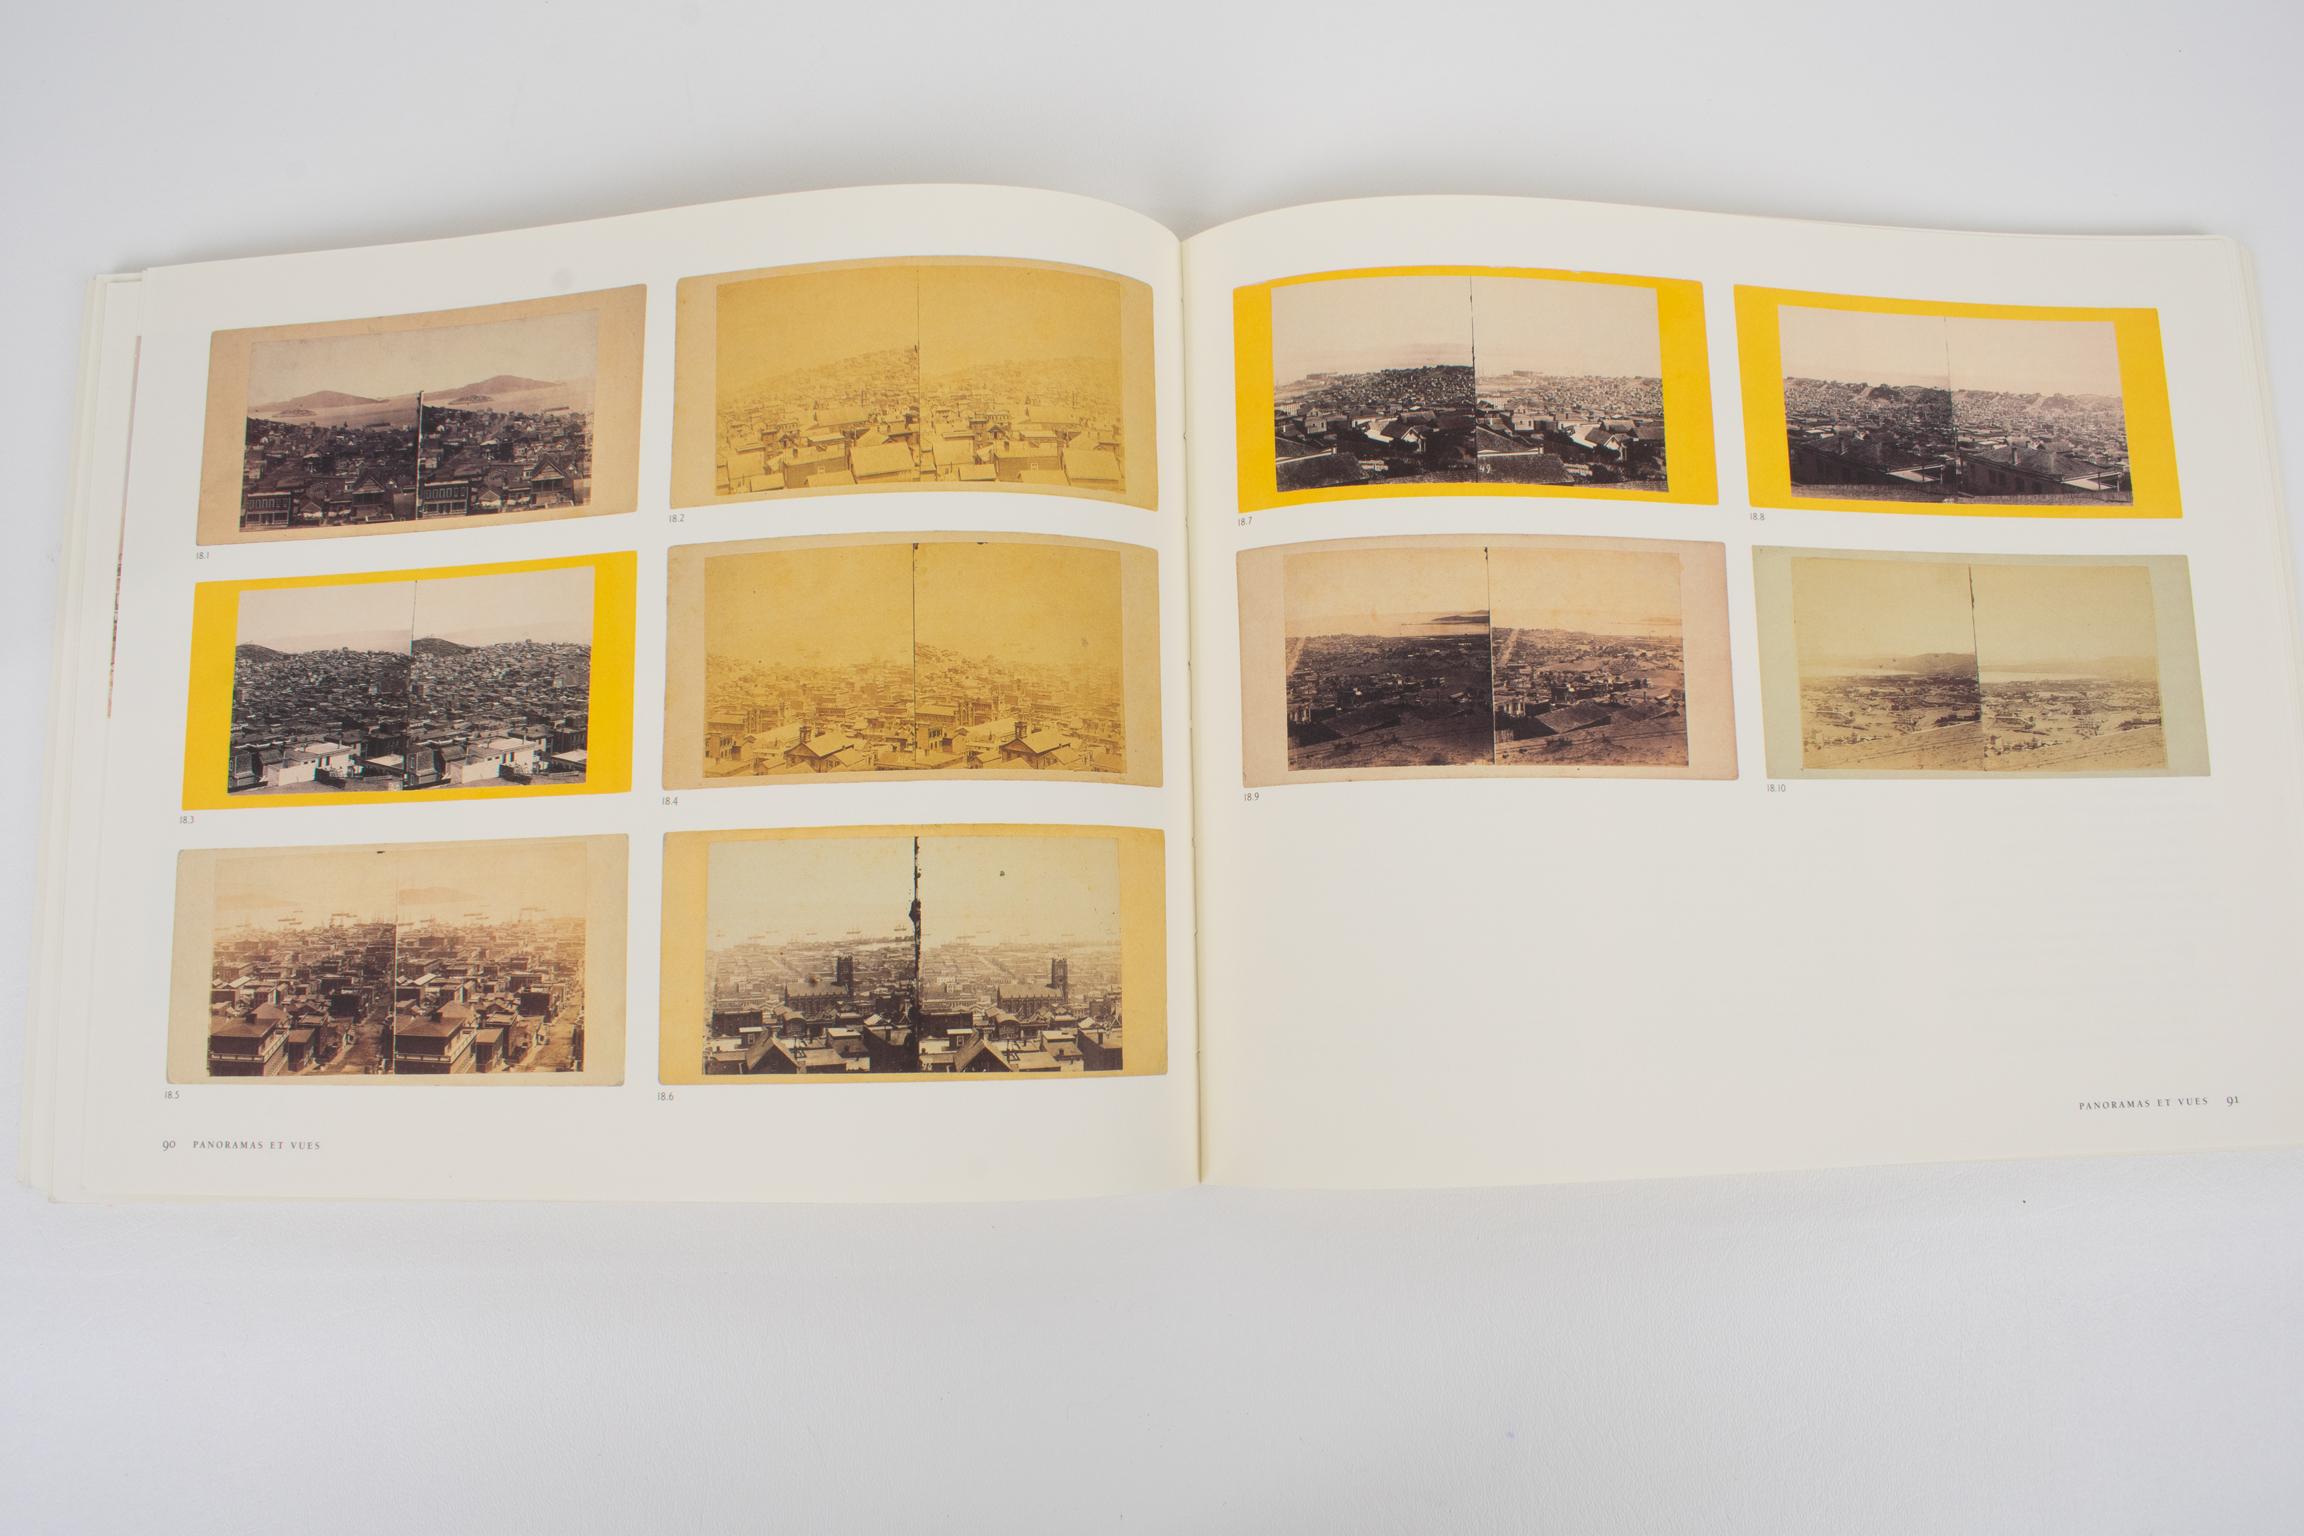 Canadian Eadweard Muybridge and the Photographic Panorama of San Francisco, French Book For Sale